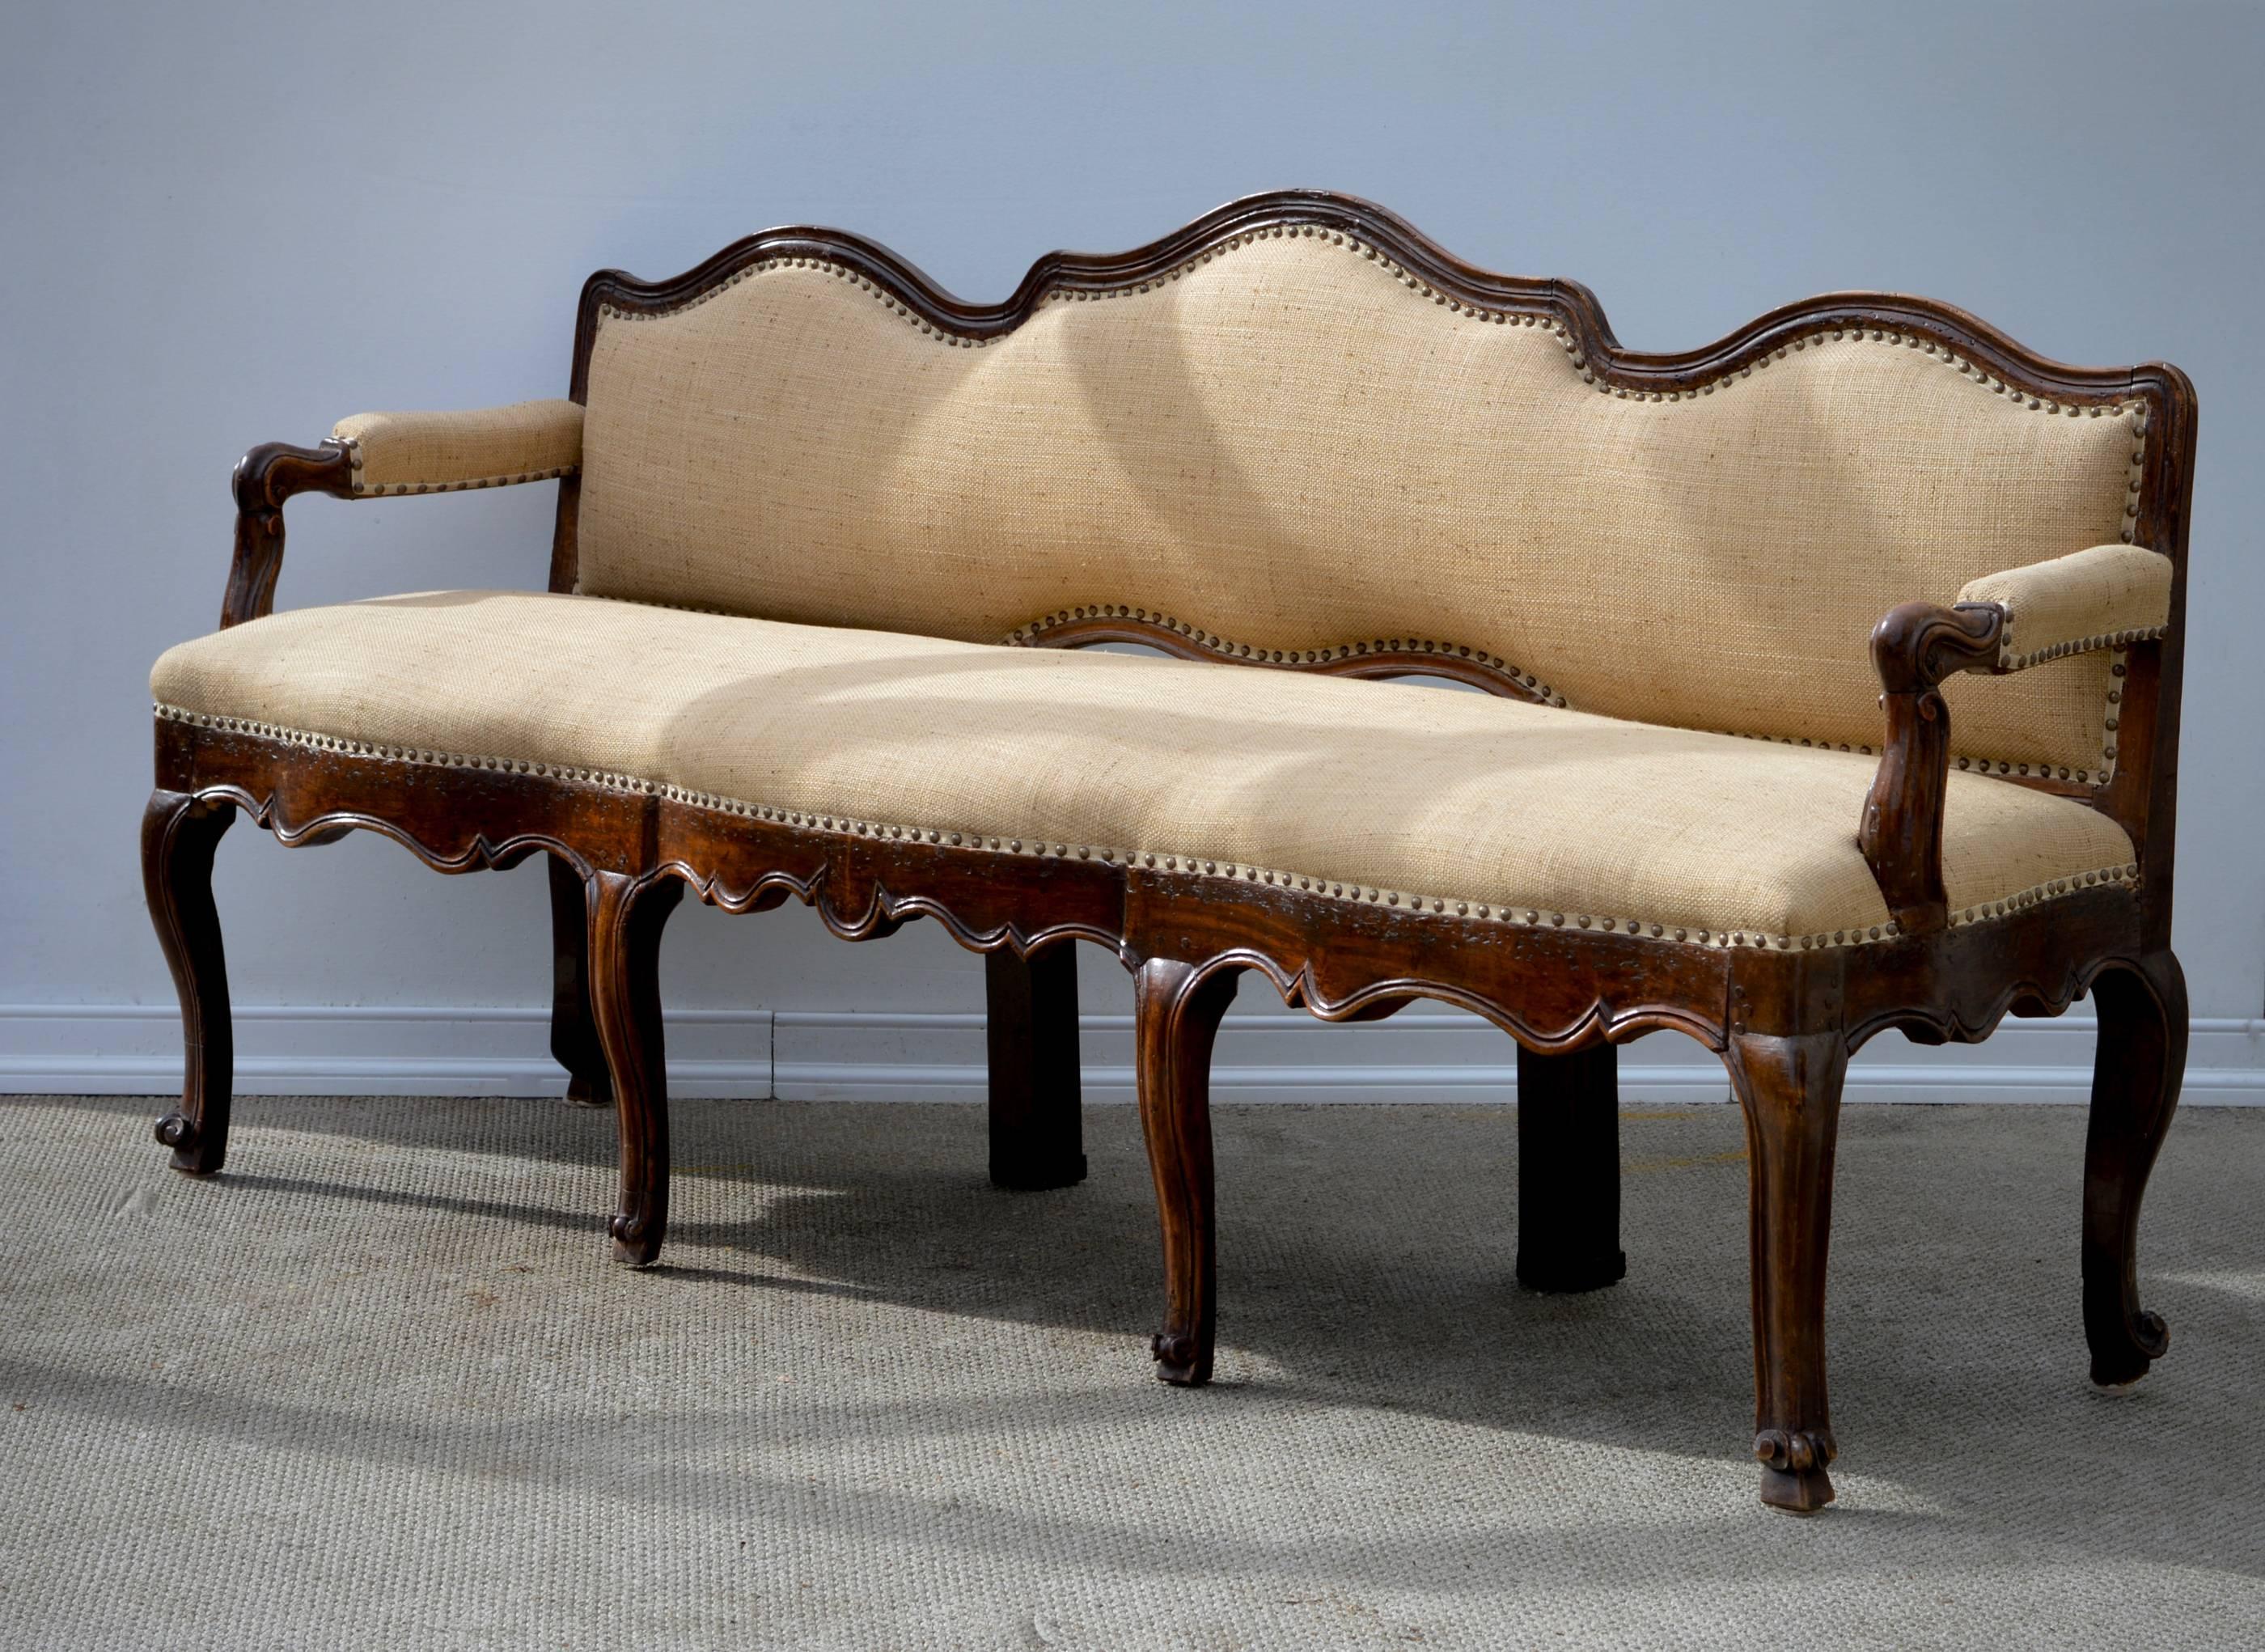 A charming and unusual Italian hall bench of walnut, circa 1780 in the Louis XIV Provincial taste. The triple back hand-carved settee is of a rare shape and in so, possesses a tremendous amount of style and will surely transform any space in which